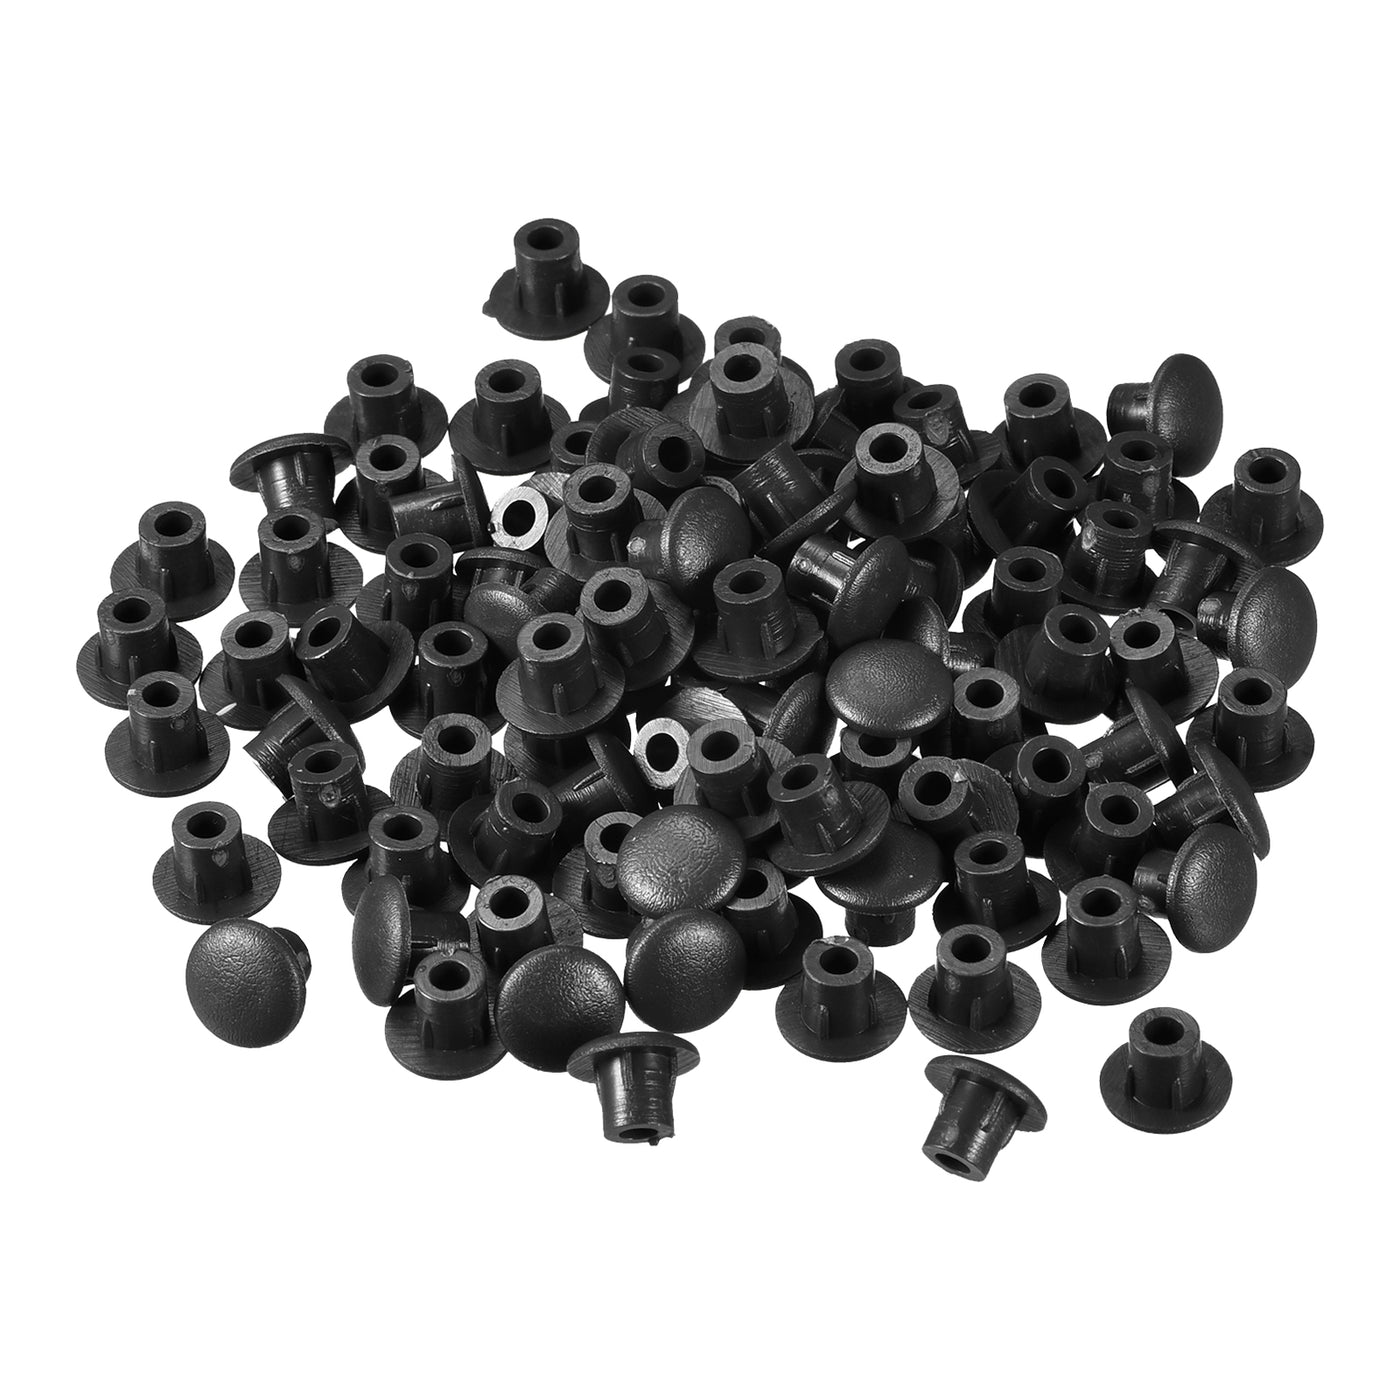 uxcell Uxcell Screw Hole Plugs, 5mm(3/16") Dia PP Snap in Shelf Button Flush Type Caps for Furniture Cabinet Cupboard, Black 180 Pcs